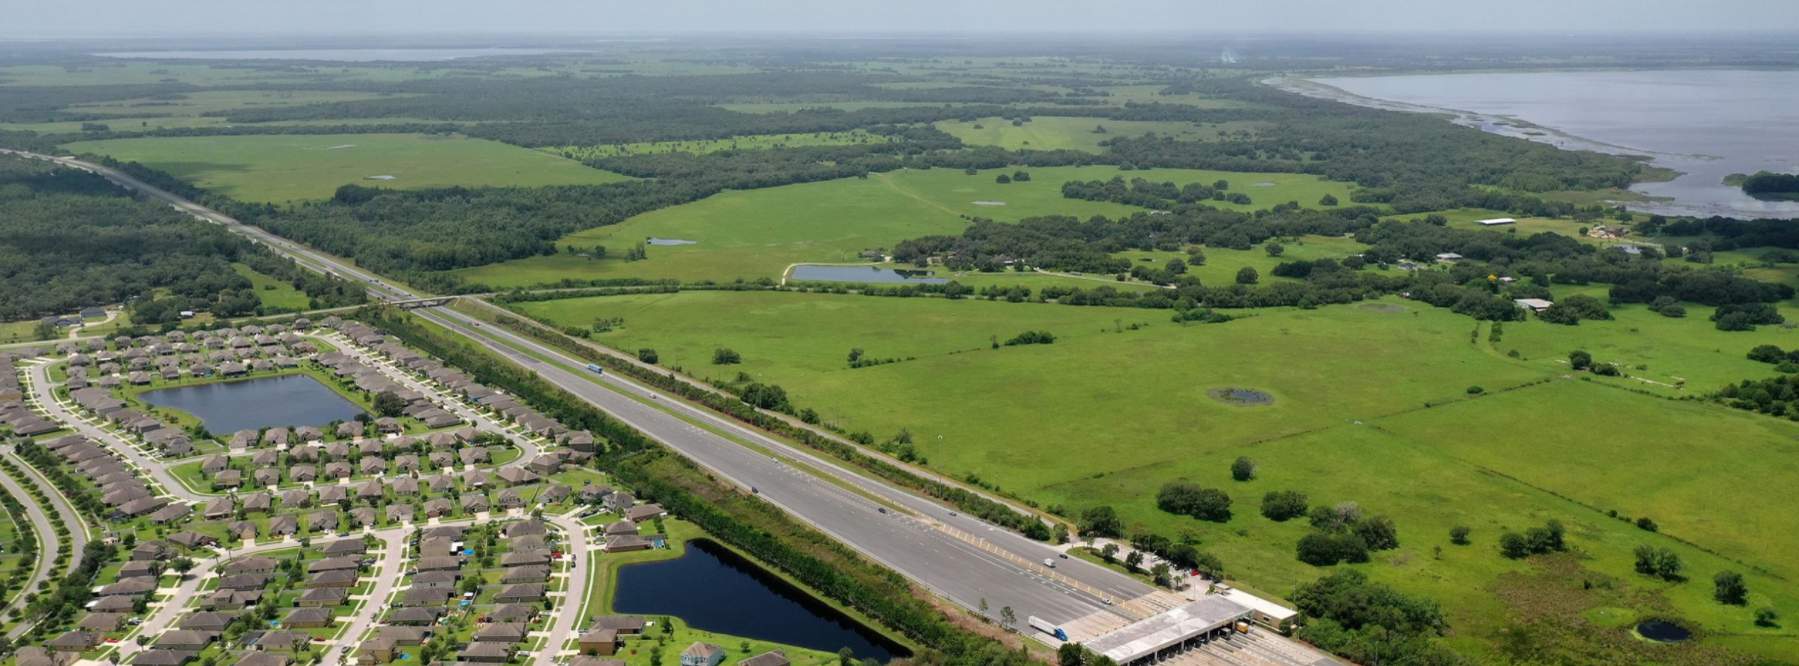 Florida ranch goes on sale for the first time in over 100 years for $140 million